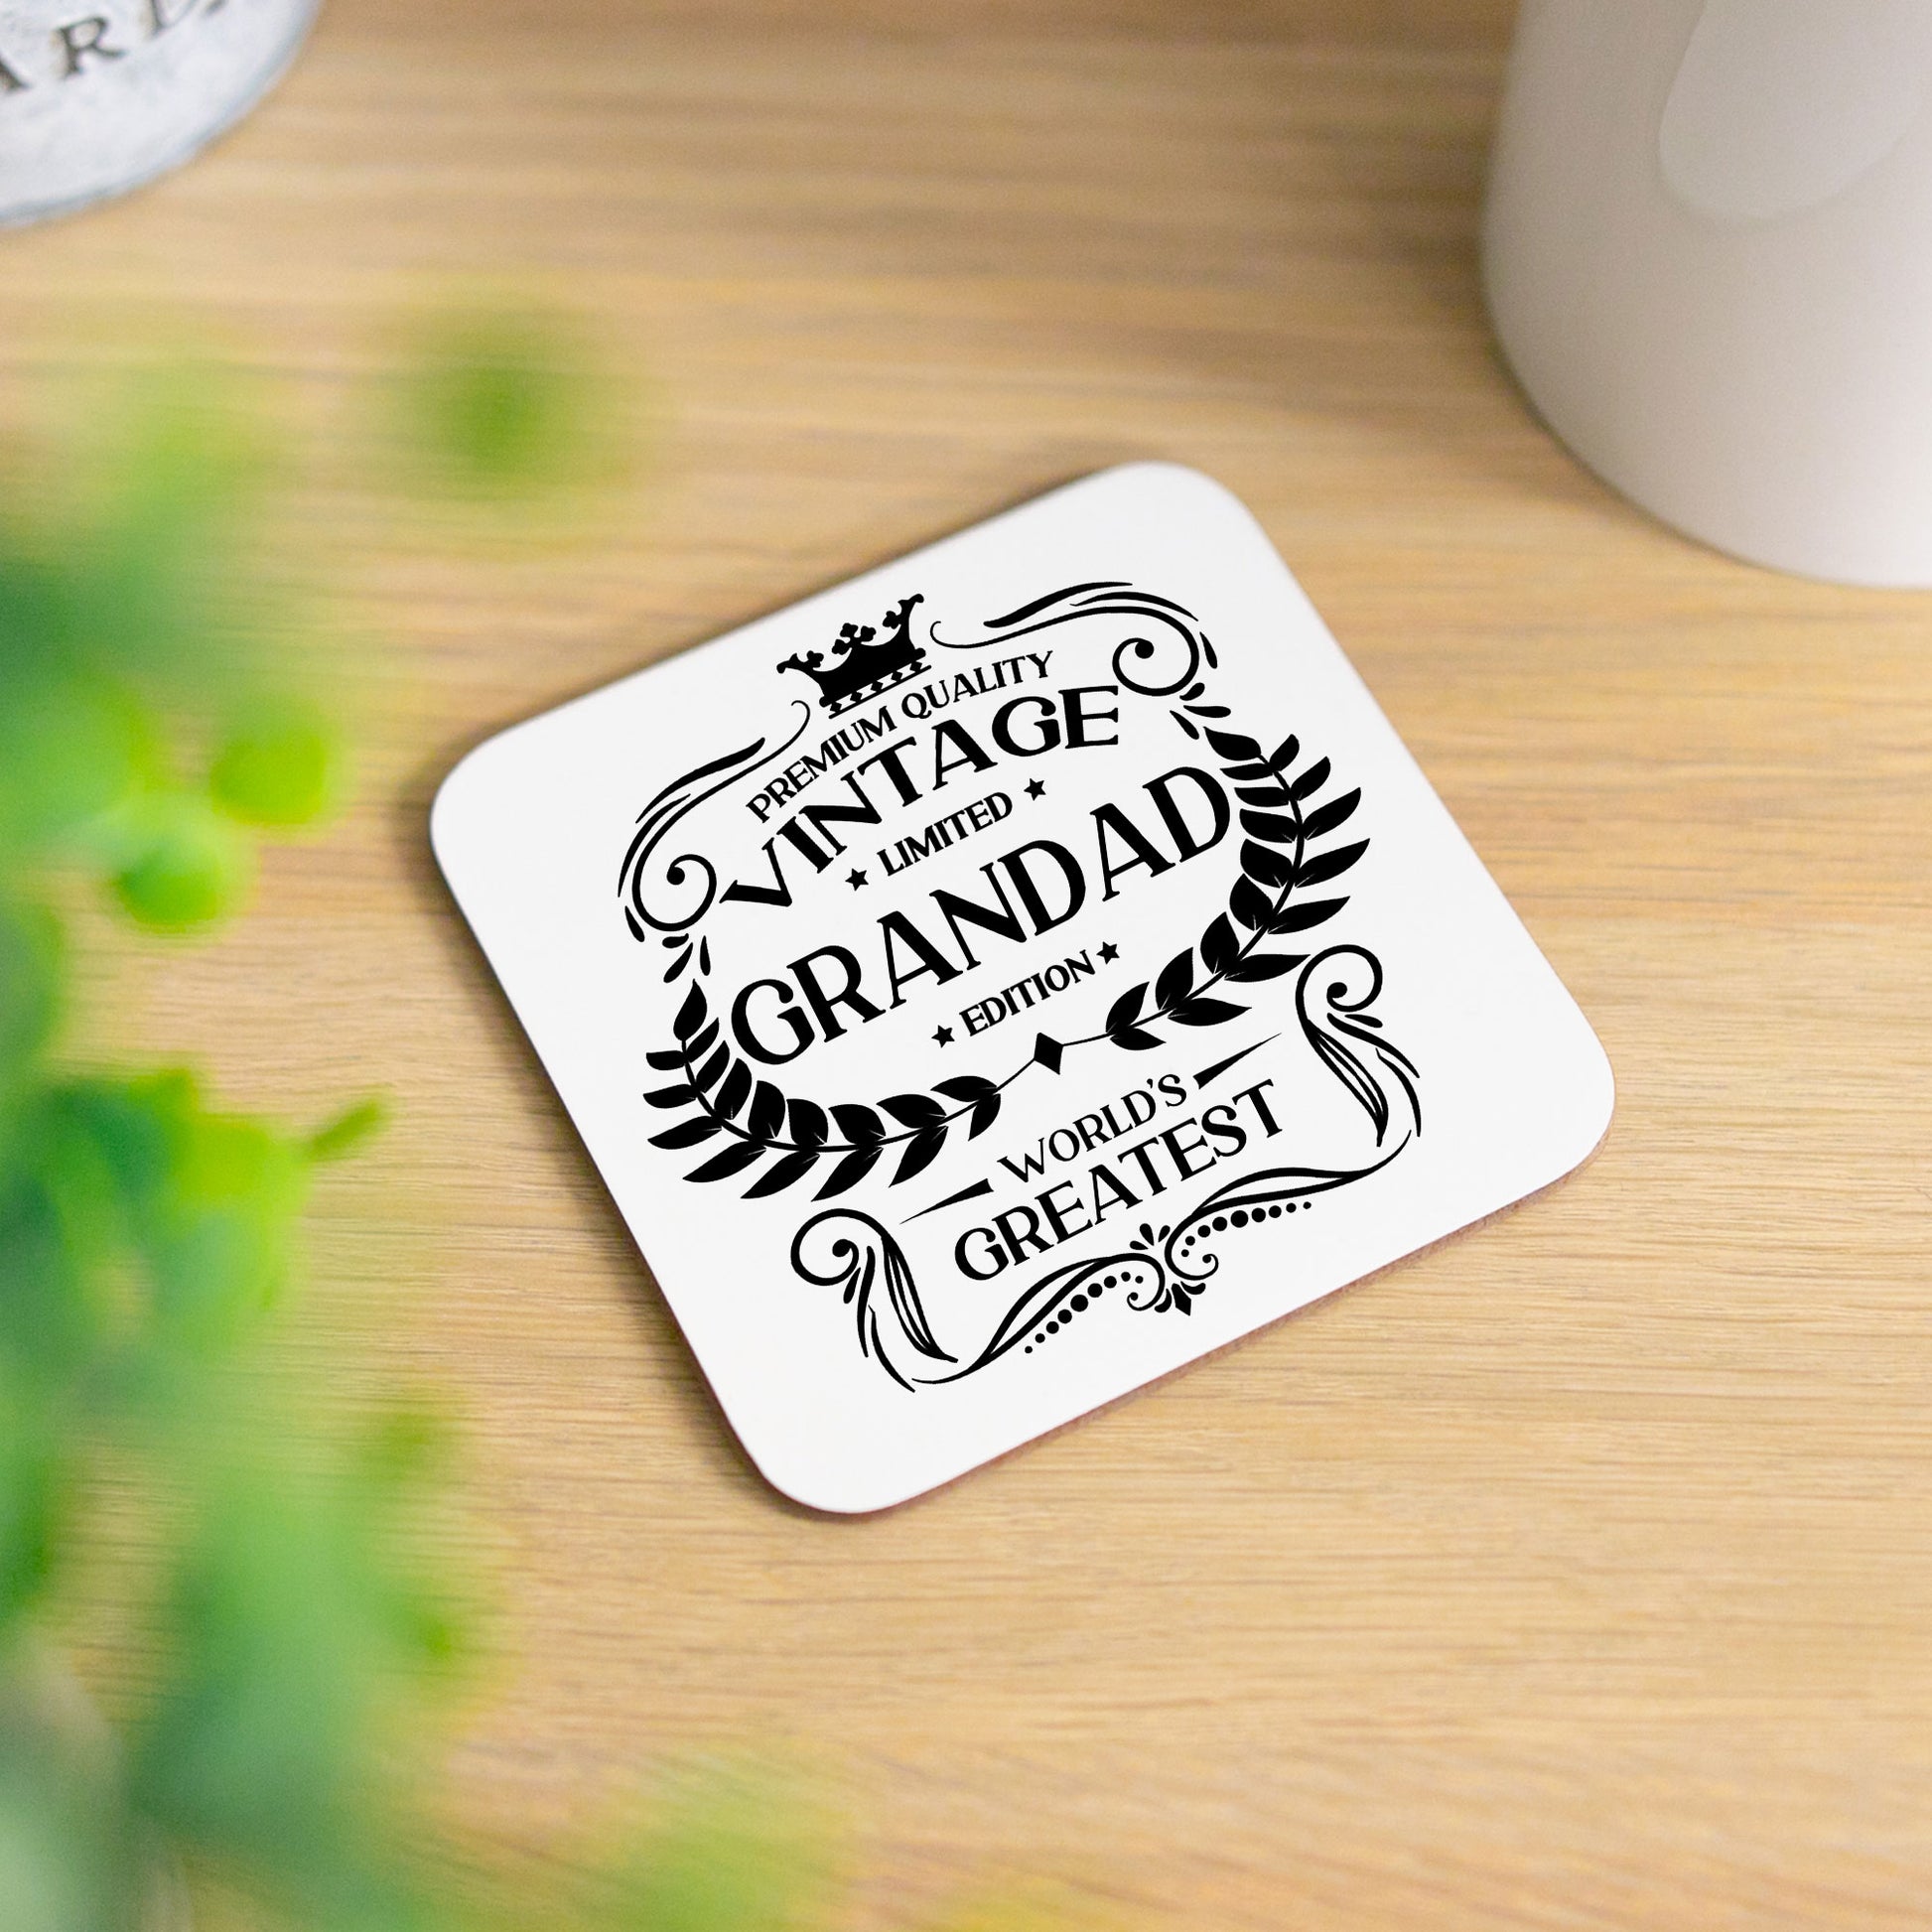 Vintage World's Greatest Grandad Engraved Stemless Gin Glass Gift  - Always Looking Good - Glass & Printed Coaster  